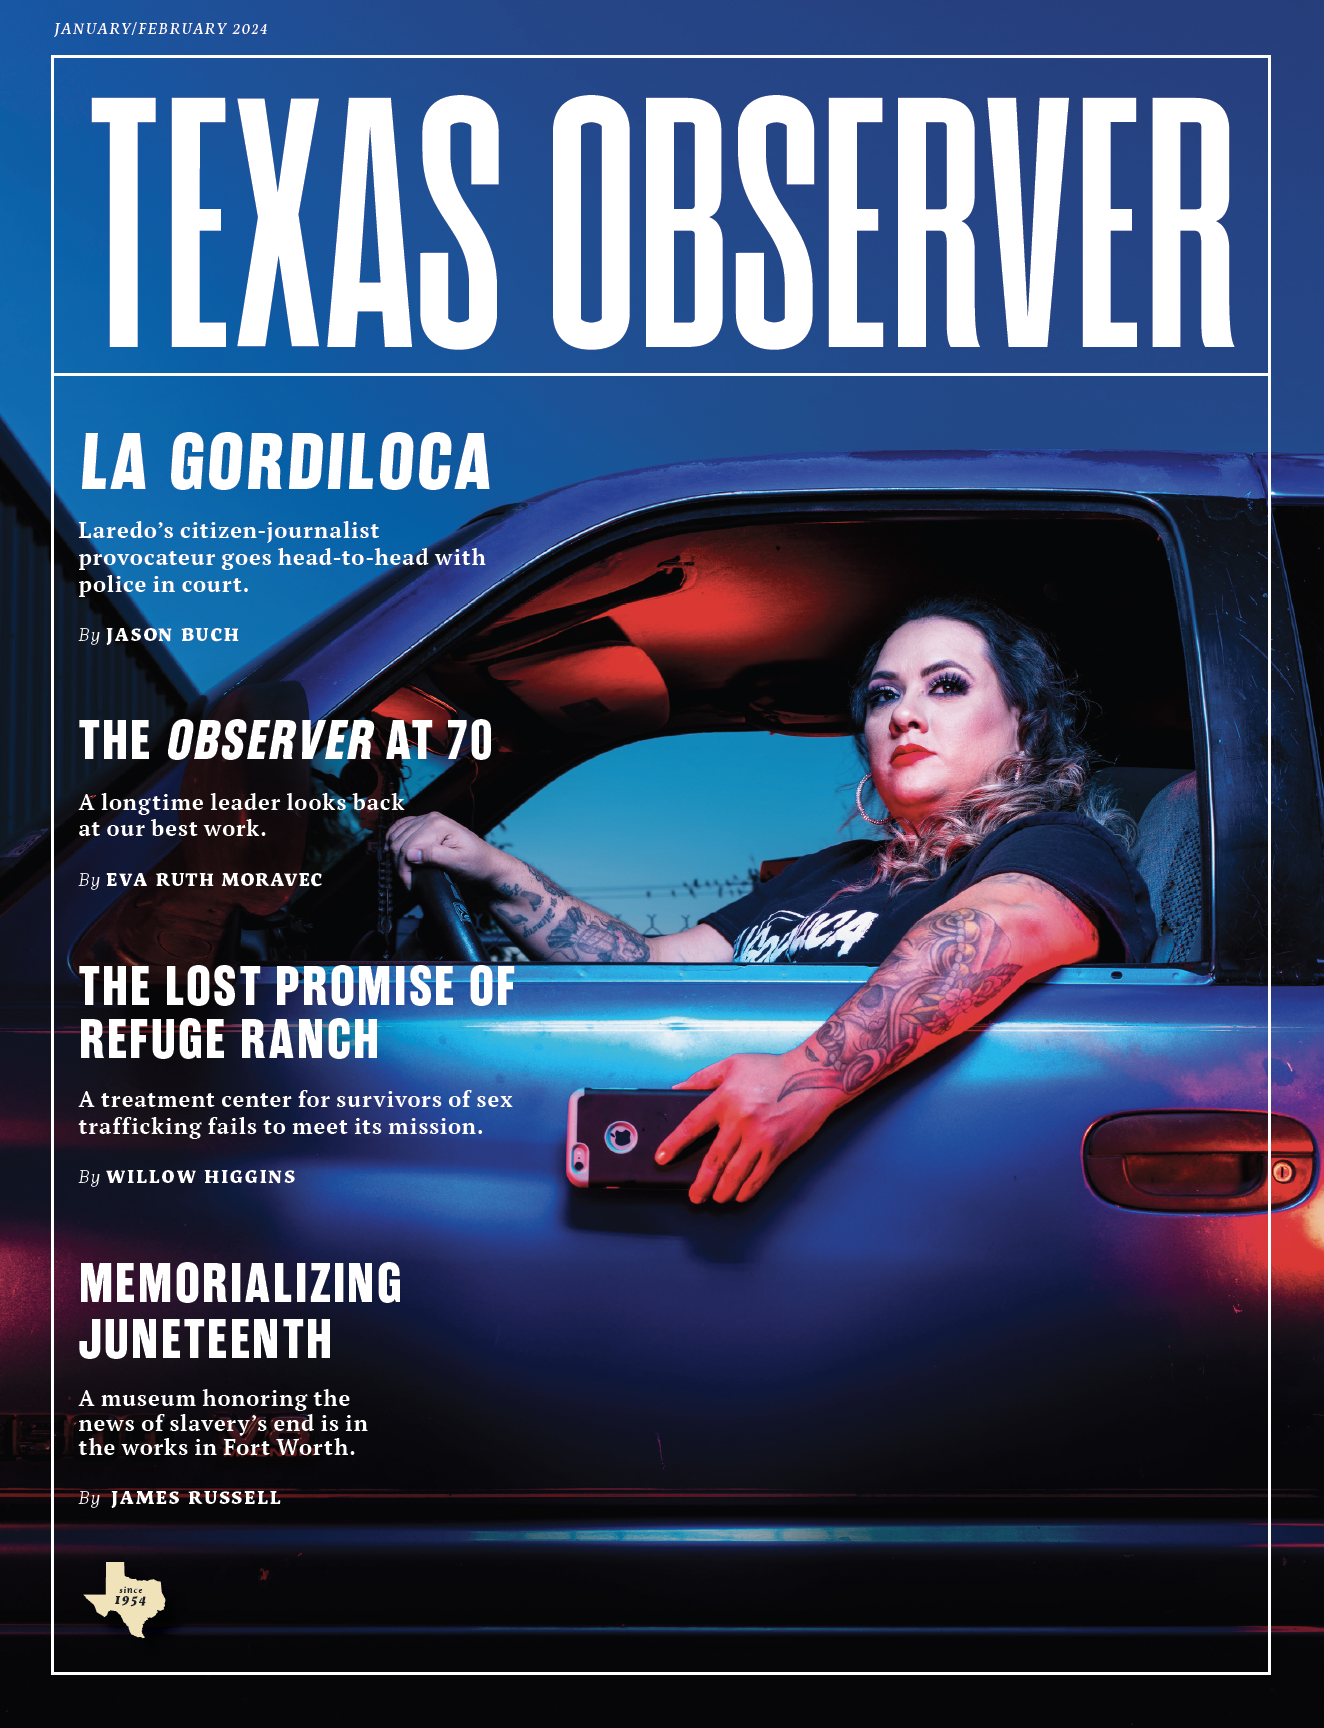 The cover of the January/February 2024 issue of Texas Observer magazine shows a stylized photo of a Latinxs woman shooting video on her smartphone as she holds it out the window of her car. Headline: La Gordiloca, Laredo’s citizen-journalist provocateur goes head-to-head with police in court, by Jason Buch. Other headlines: The Observer at 70, A longtime leader looks back at our best work, by Eva Ruth Moravec. The Lost Promise of Refuge Ranch, A treatment center for survivors of sex trafficking fails to meet its mission, by WIllow Higgins. Memorializing Juneteenth, A museum honoring the news of slavery’s end is in the works in Fort Worth, by James Russell. A Texas symbol reads “since 1954”.